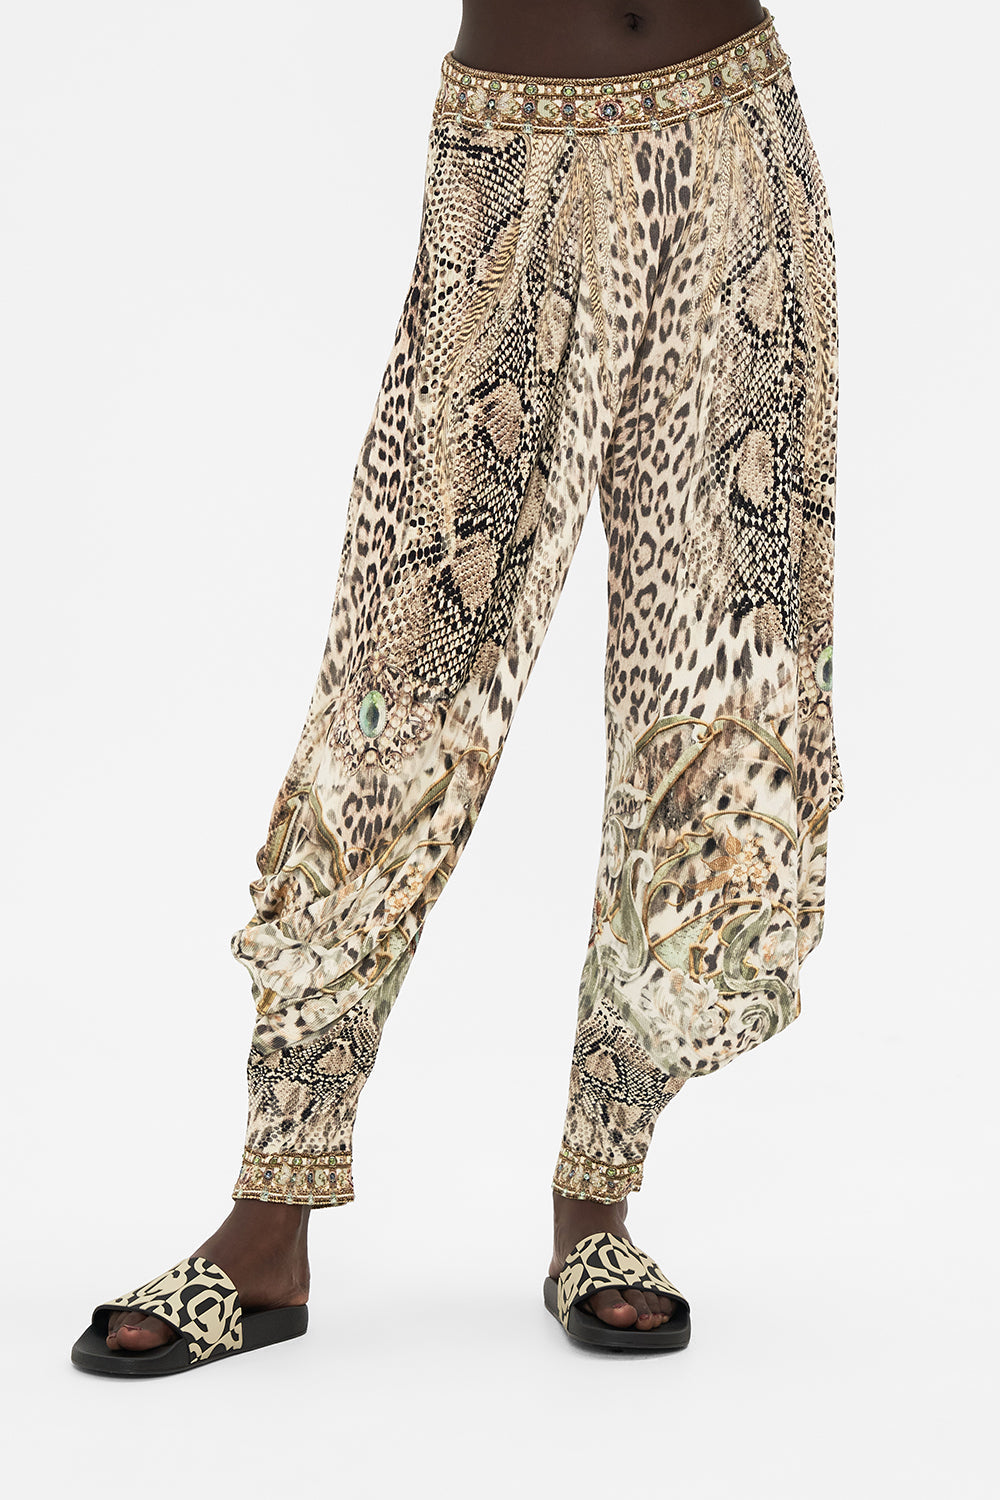 CAMILLA jersey pants in Looking Glass Houses print